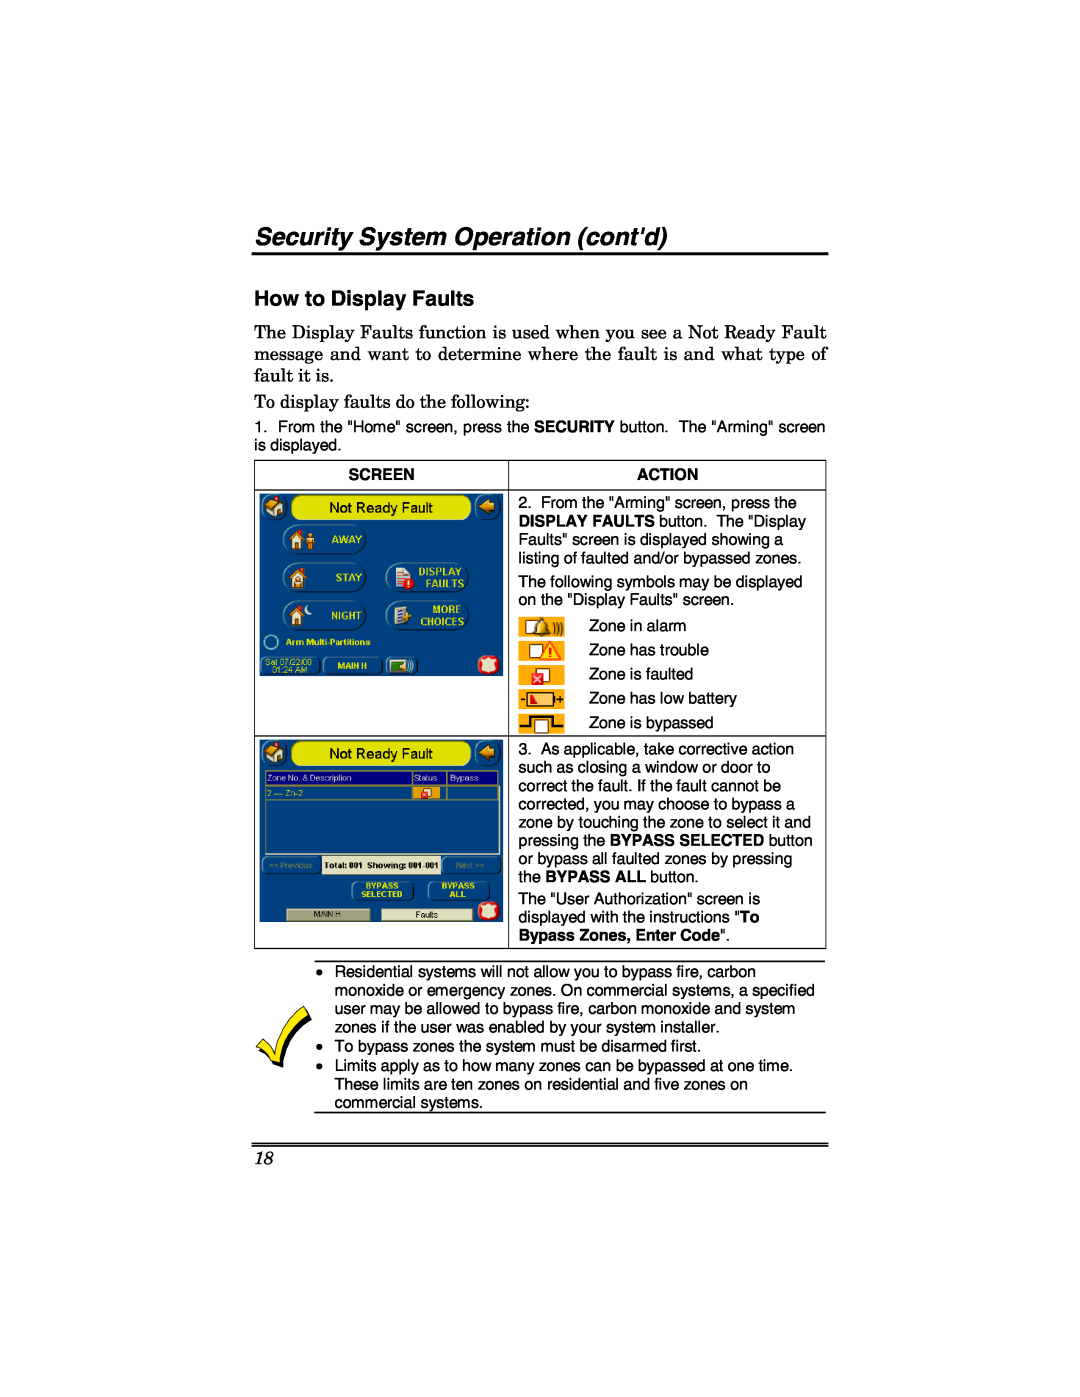 Honeywell 6271 manual How to Display Faults, Security System Operation contd, Screen, Action, Bypass Zones, Enter Code 